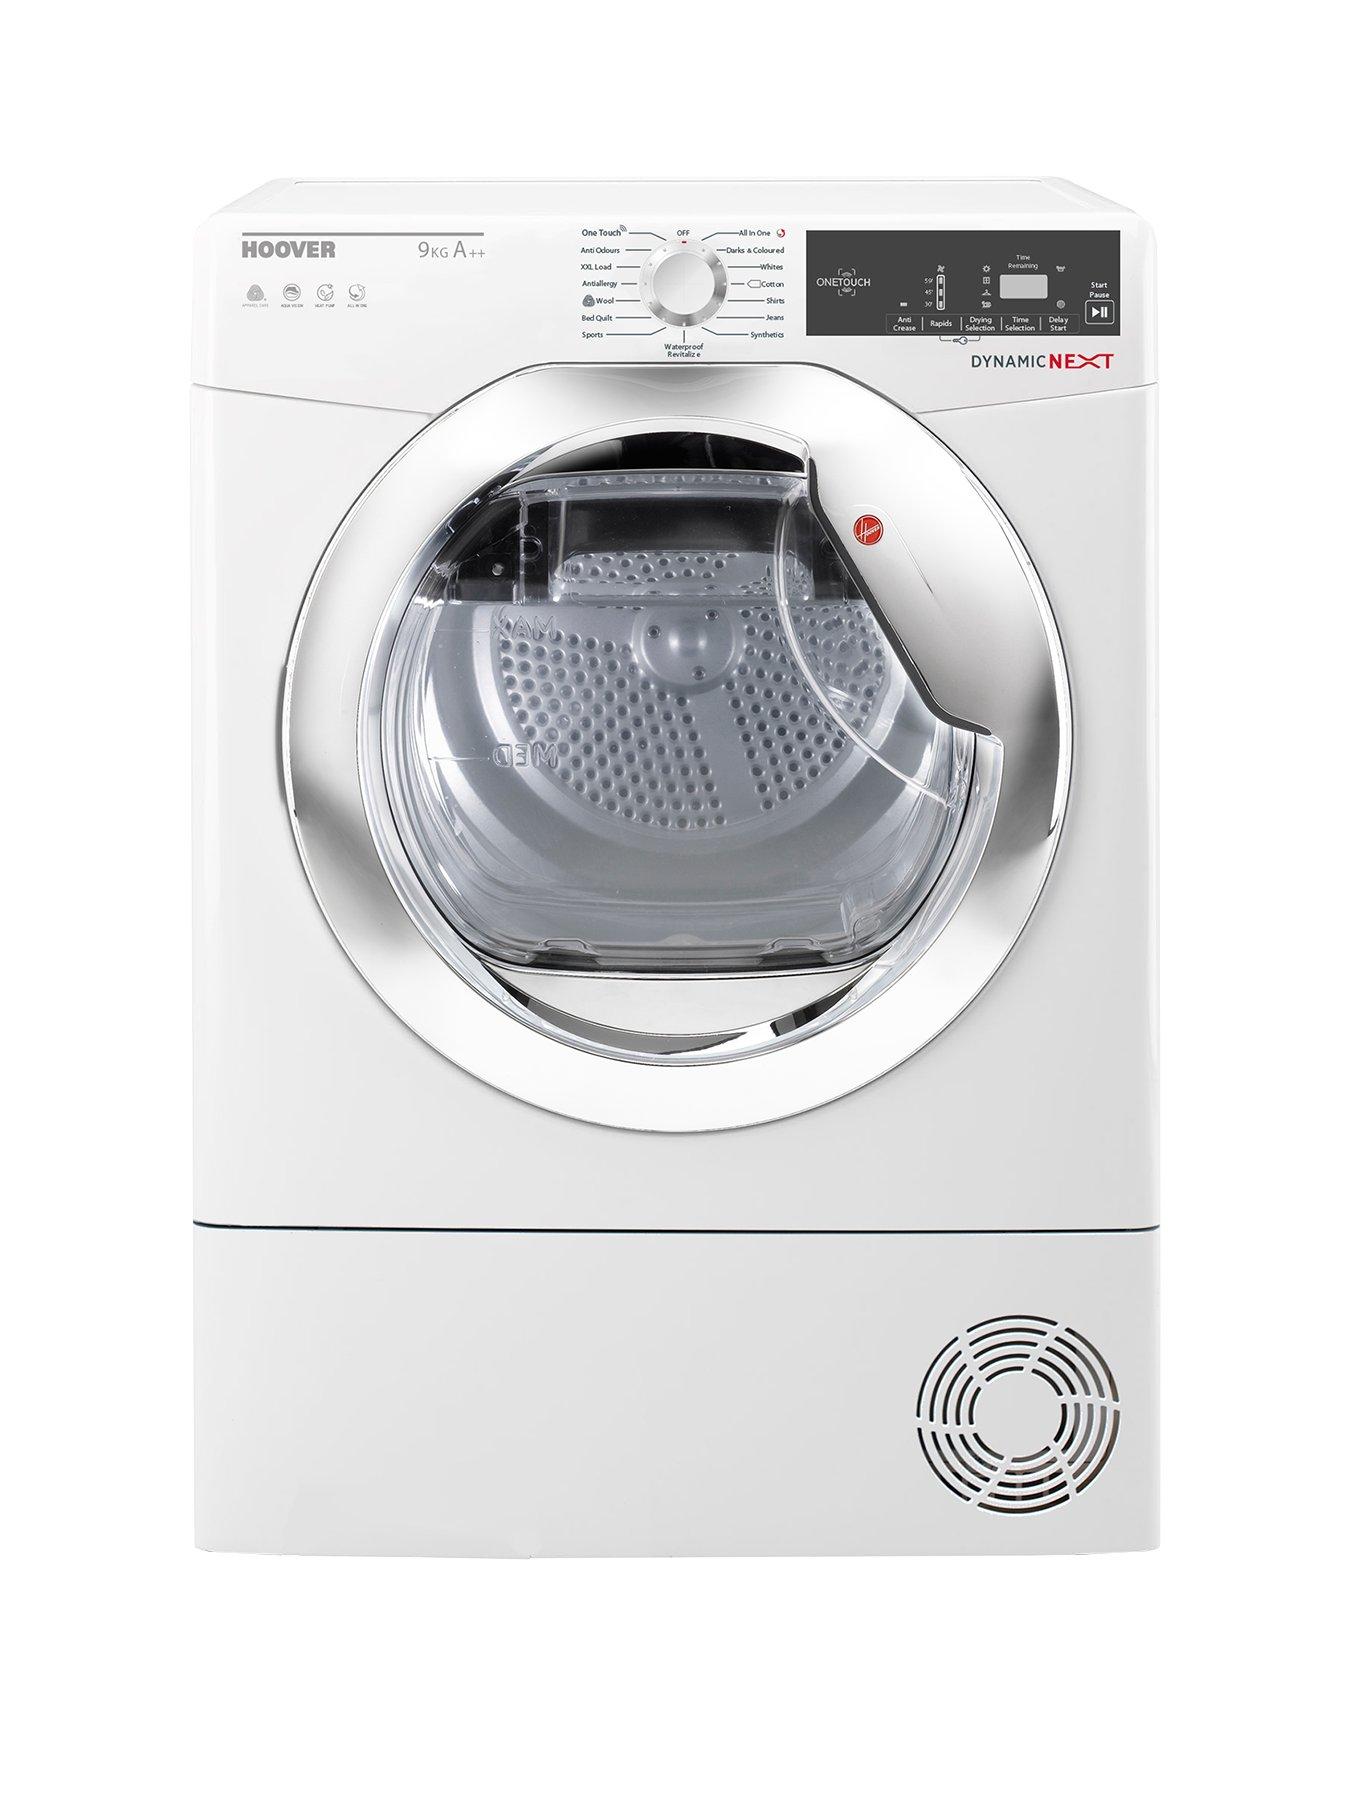 Hoover Dynamic Next Dxh9A2Tce 9Kg Load, Aquavision, Heat Pump Tumble Dryer With One Touch – White/Chrome